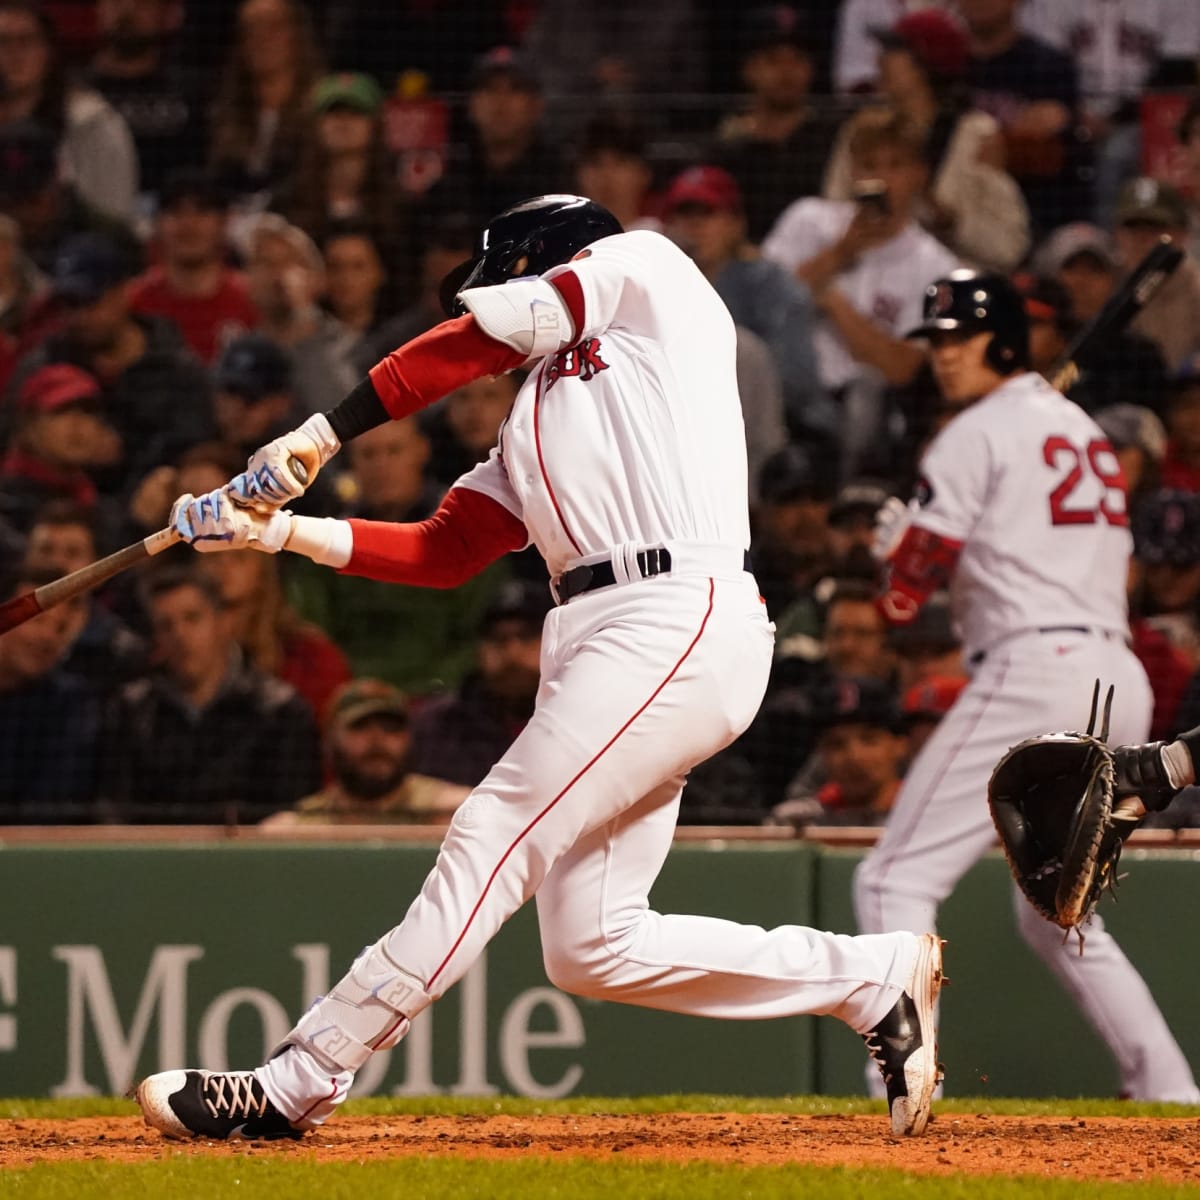 WATCH: Trevor Story Hits Two 2-Run Home Runs for Boston Red Sox on Thursday  - Fastball